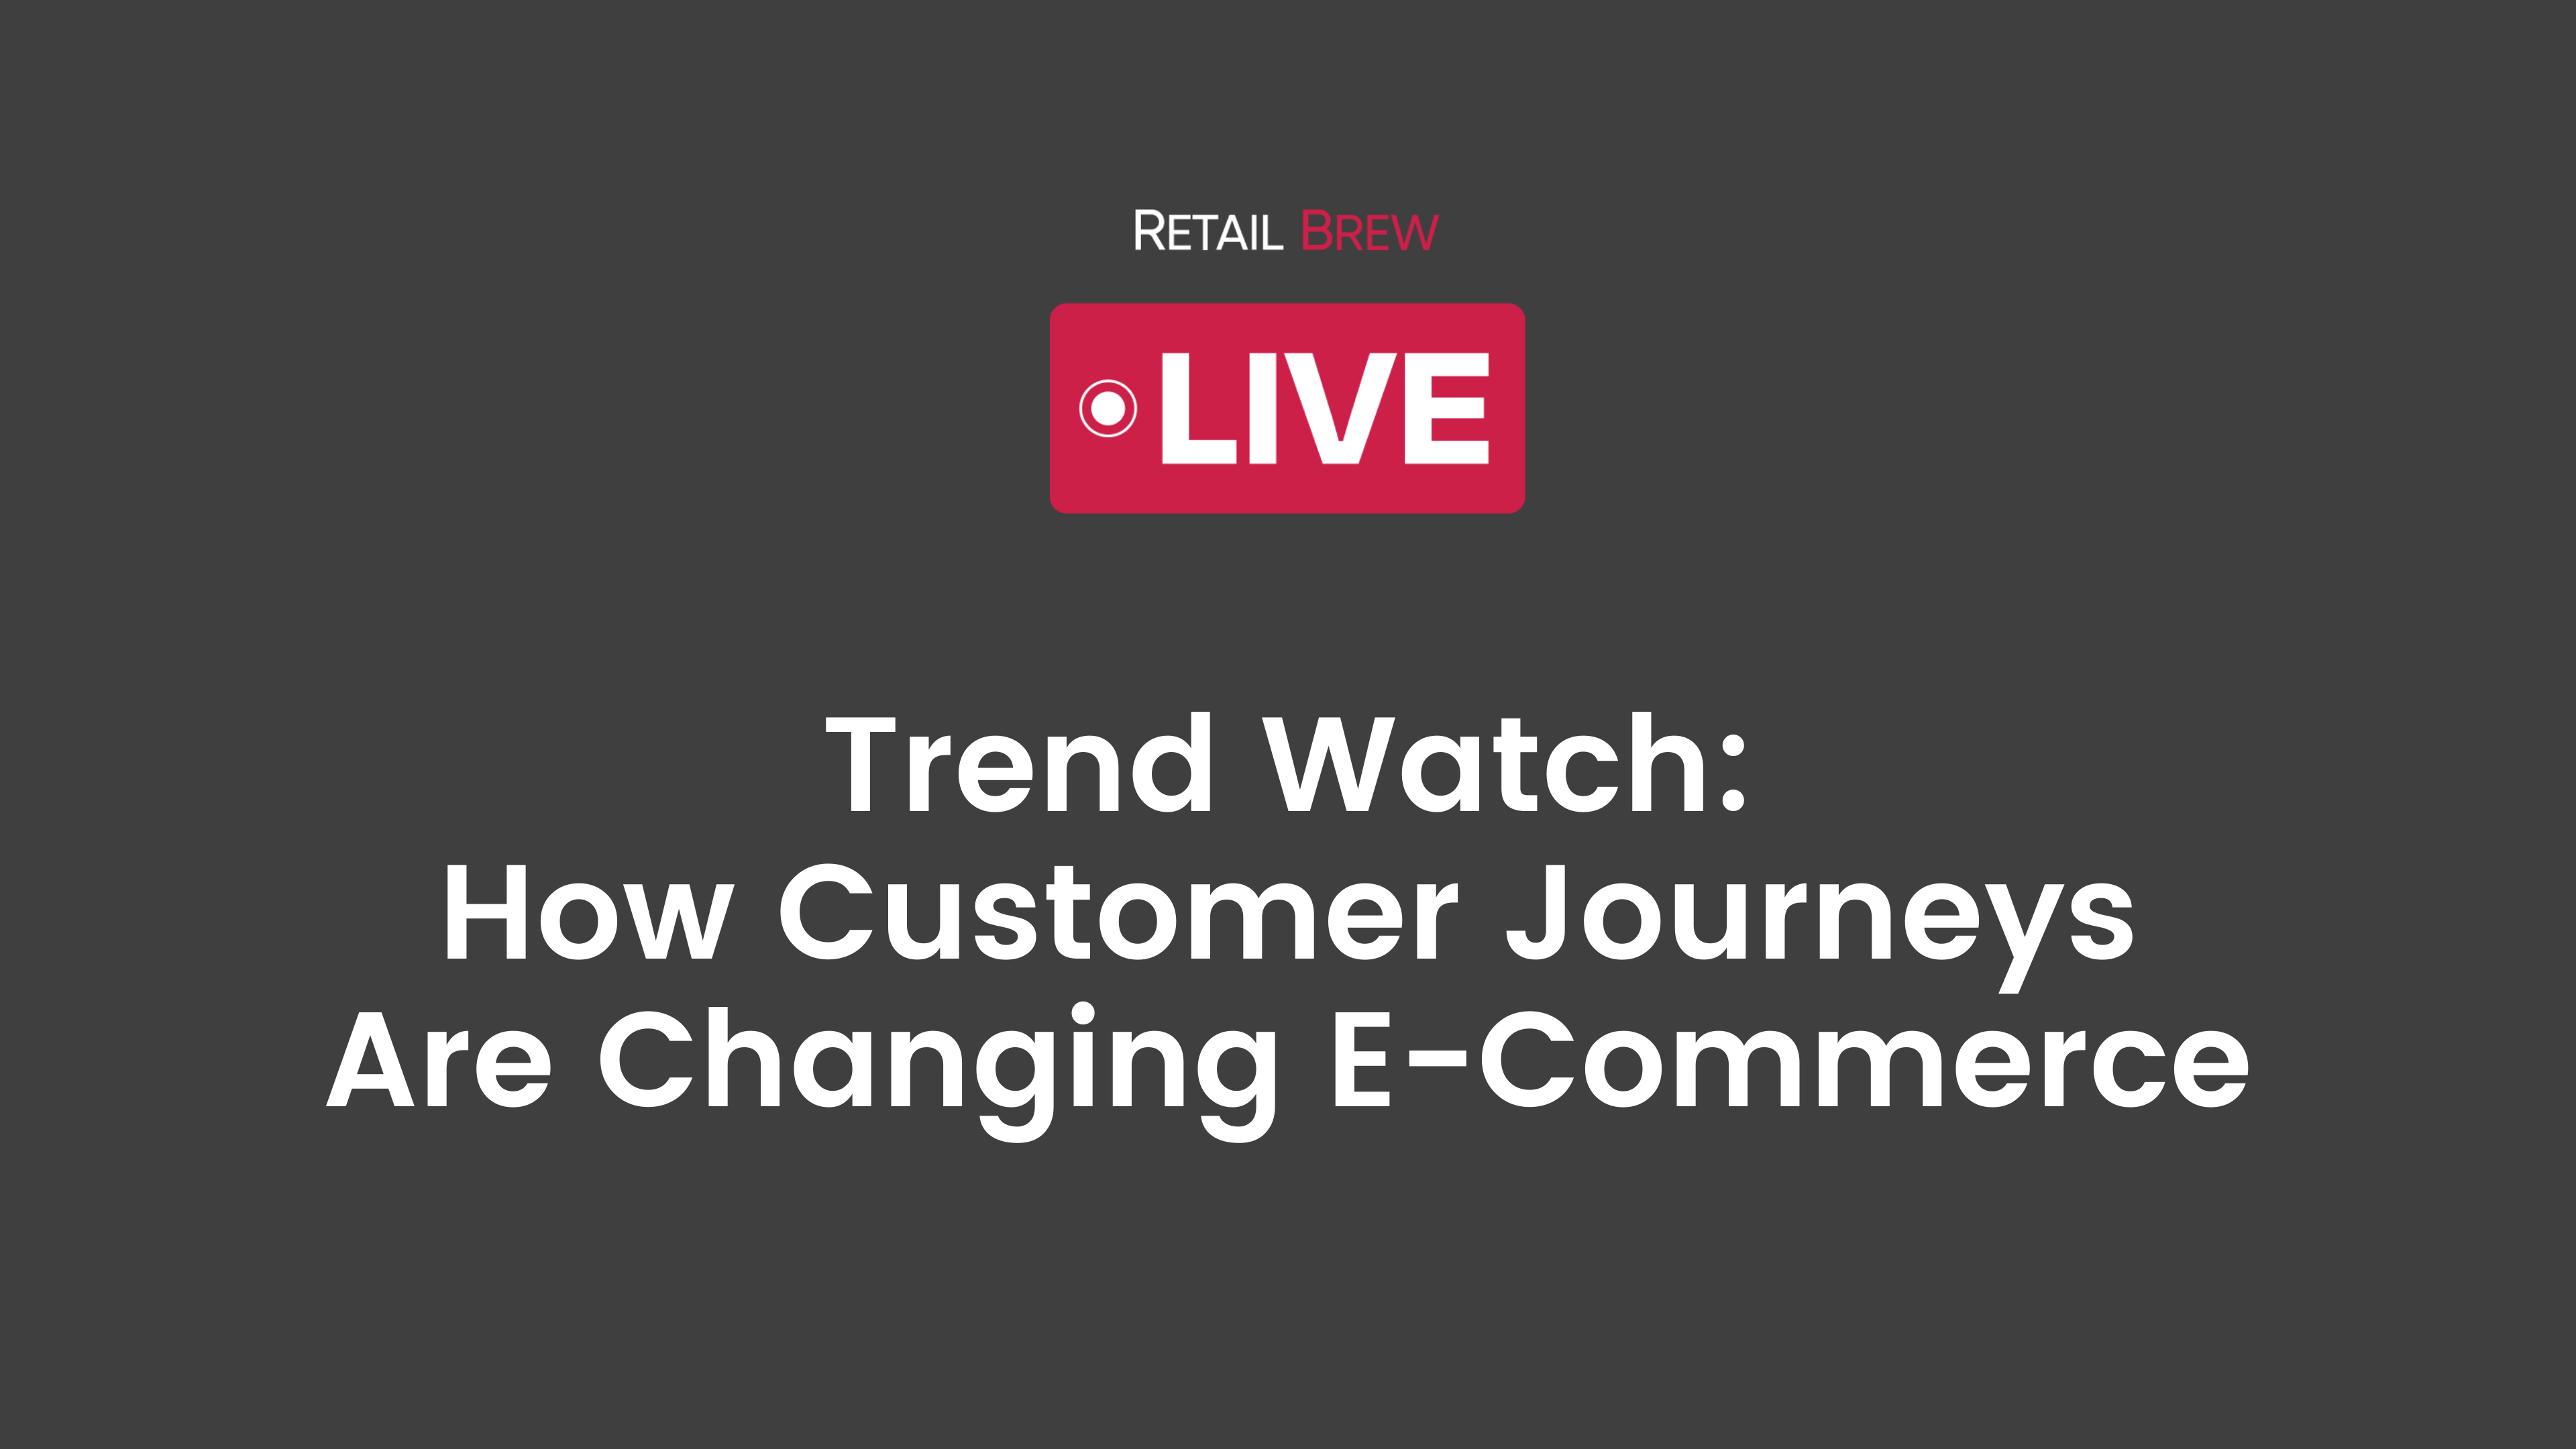 Retail Brew Live virtual event "Trend Watch: How Customer Journeys Are Changing E-Commerce